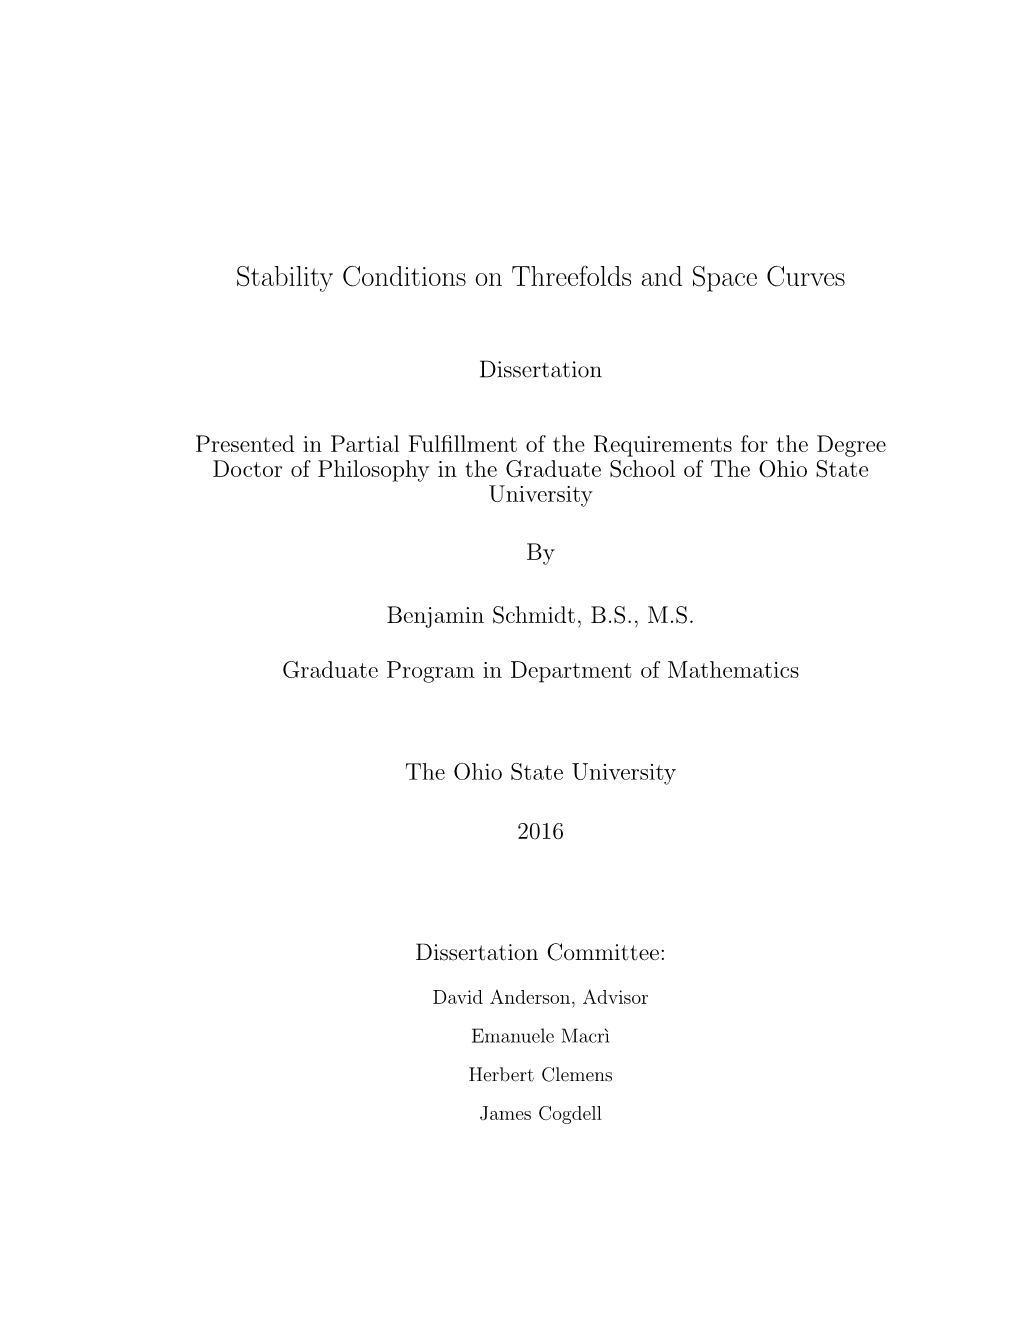 Stability Conditions on Threefolds and Space Curves